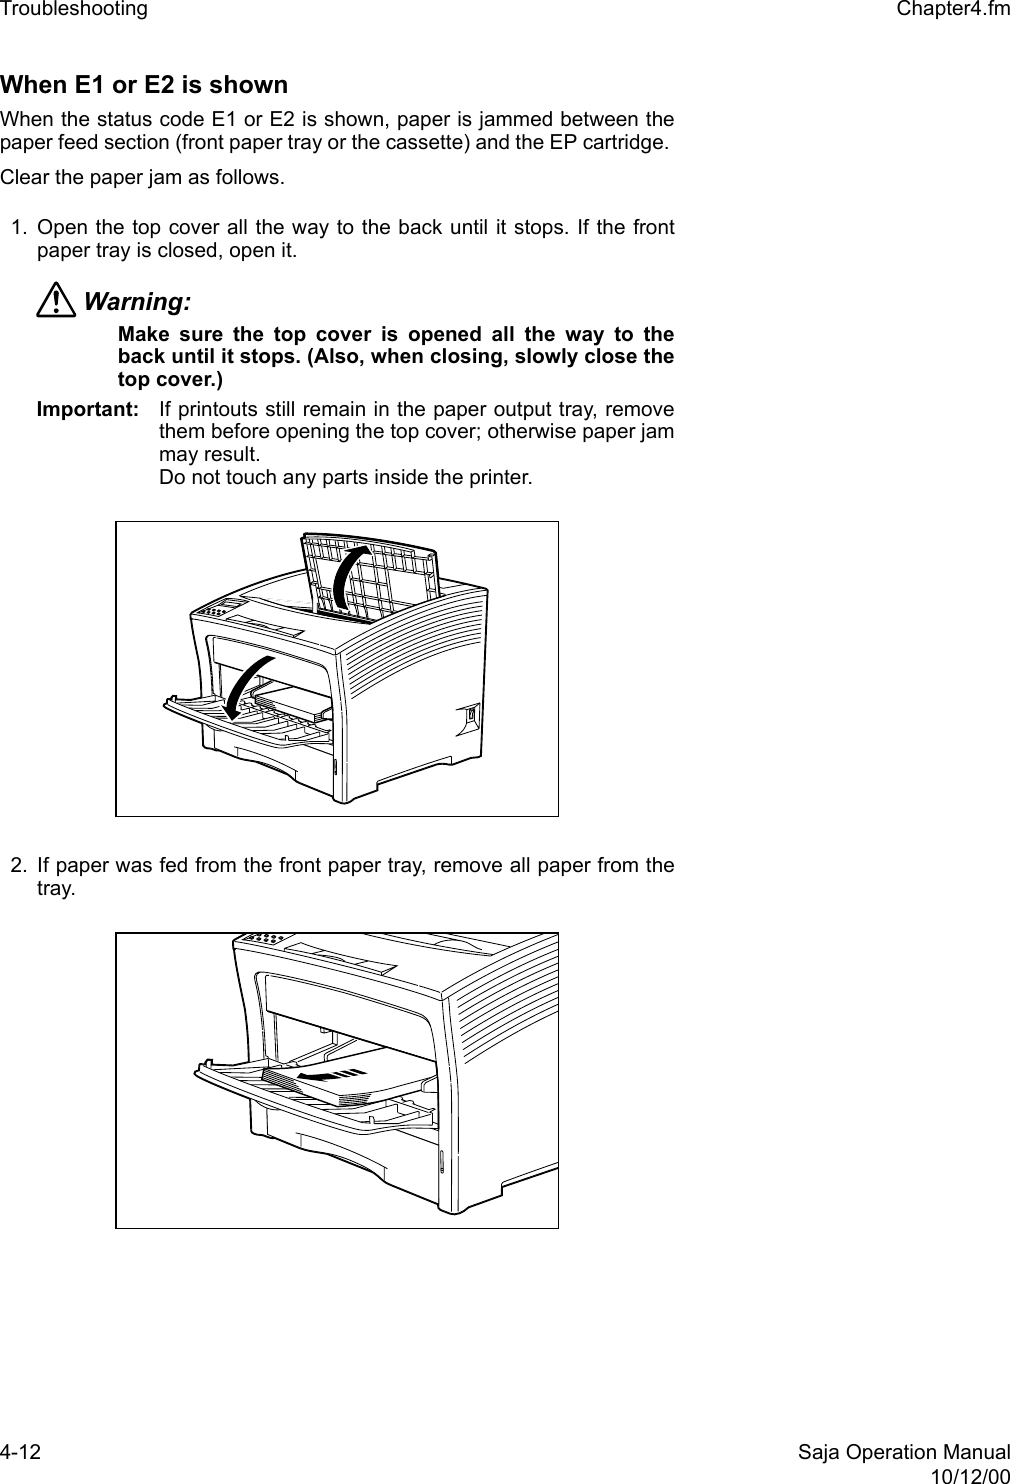 4-12 Saja Operation Manual10/12/00Troubleshooting  Chapter4.fmWhen E1 or E2 is shown When the status code E1 or E2 is shown, paper is jammed between thepaper feed section (front paper tray or the cassette) and the EP cartridge. Clear the paper jam as follows. 1. Open the top cover all the way to the back until it stops. If the frontpaper tray is closed, open it.Warning: Make sure the top cover is opened all the way to theback until it stops. (Also, when closing, slowly close thetop cover.) Important: If printouts still remain in the paper output tray, removethem before opening the top cover; otherwise paper jammay result.Do not touch any parts inside the printer. 2. If paper was fed from the front paper tray, remove all paper from thetray. 